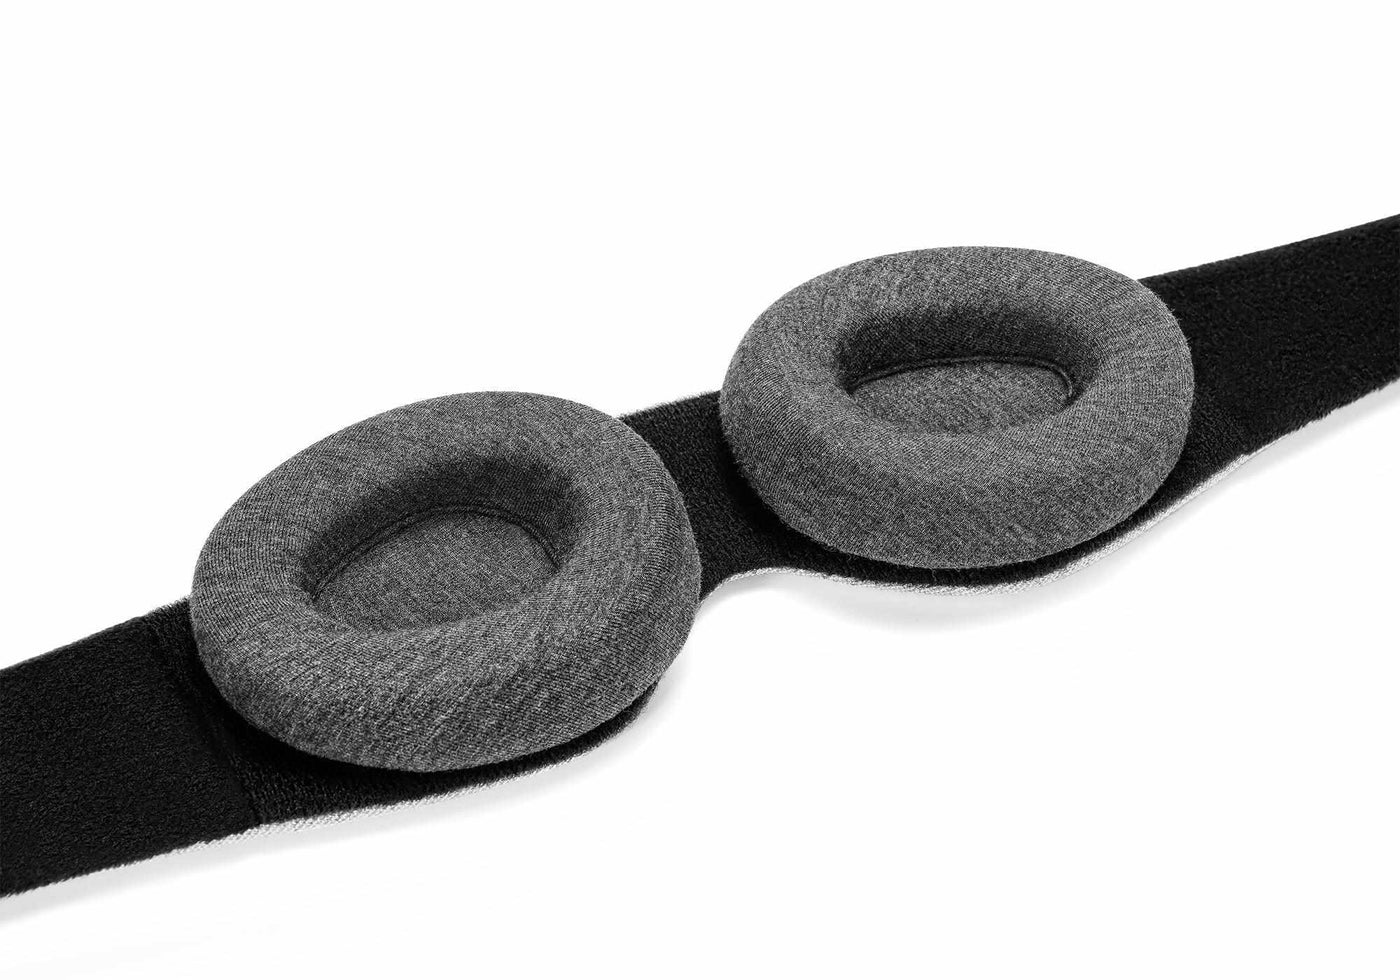 The black inner portion of a sleep mask with 2 convex eye cups attached.